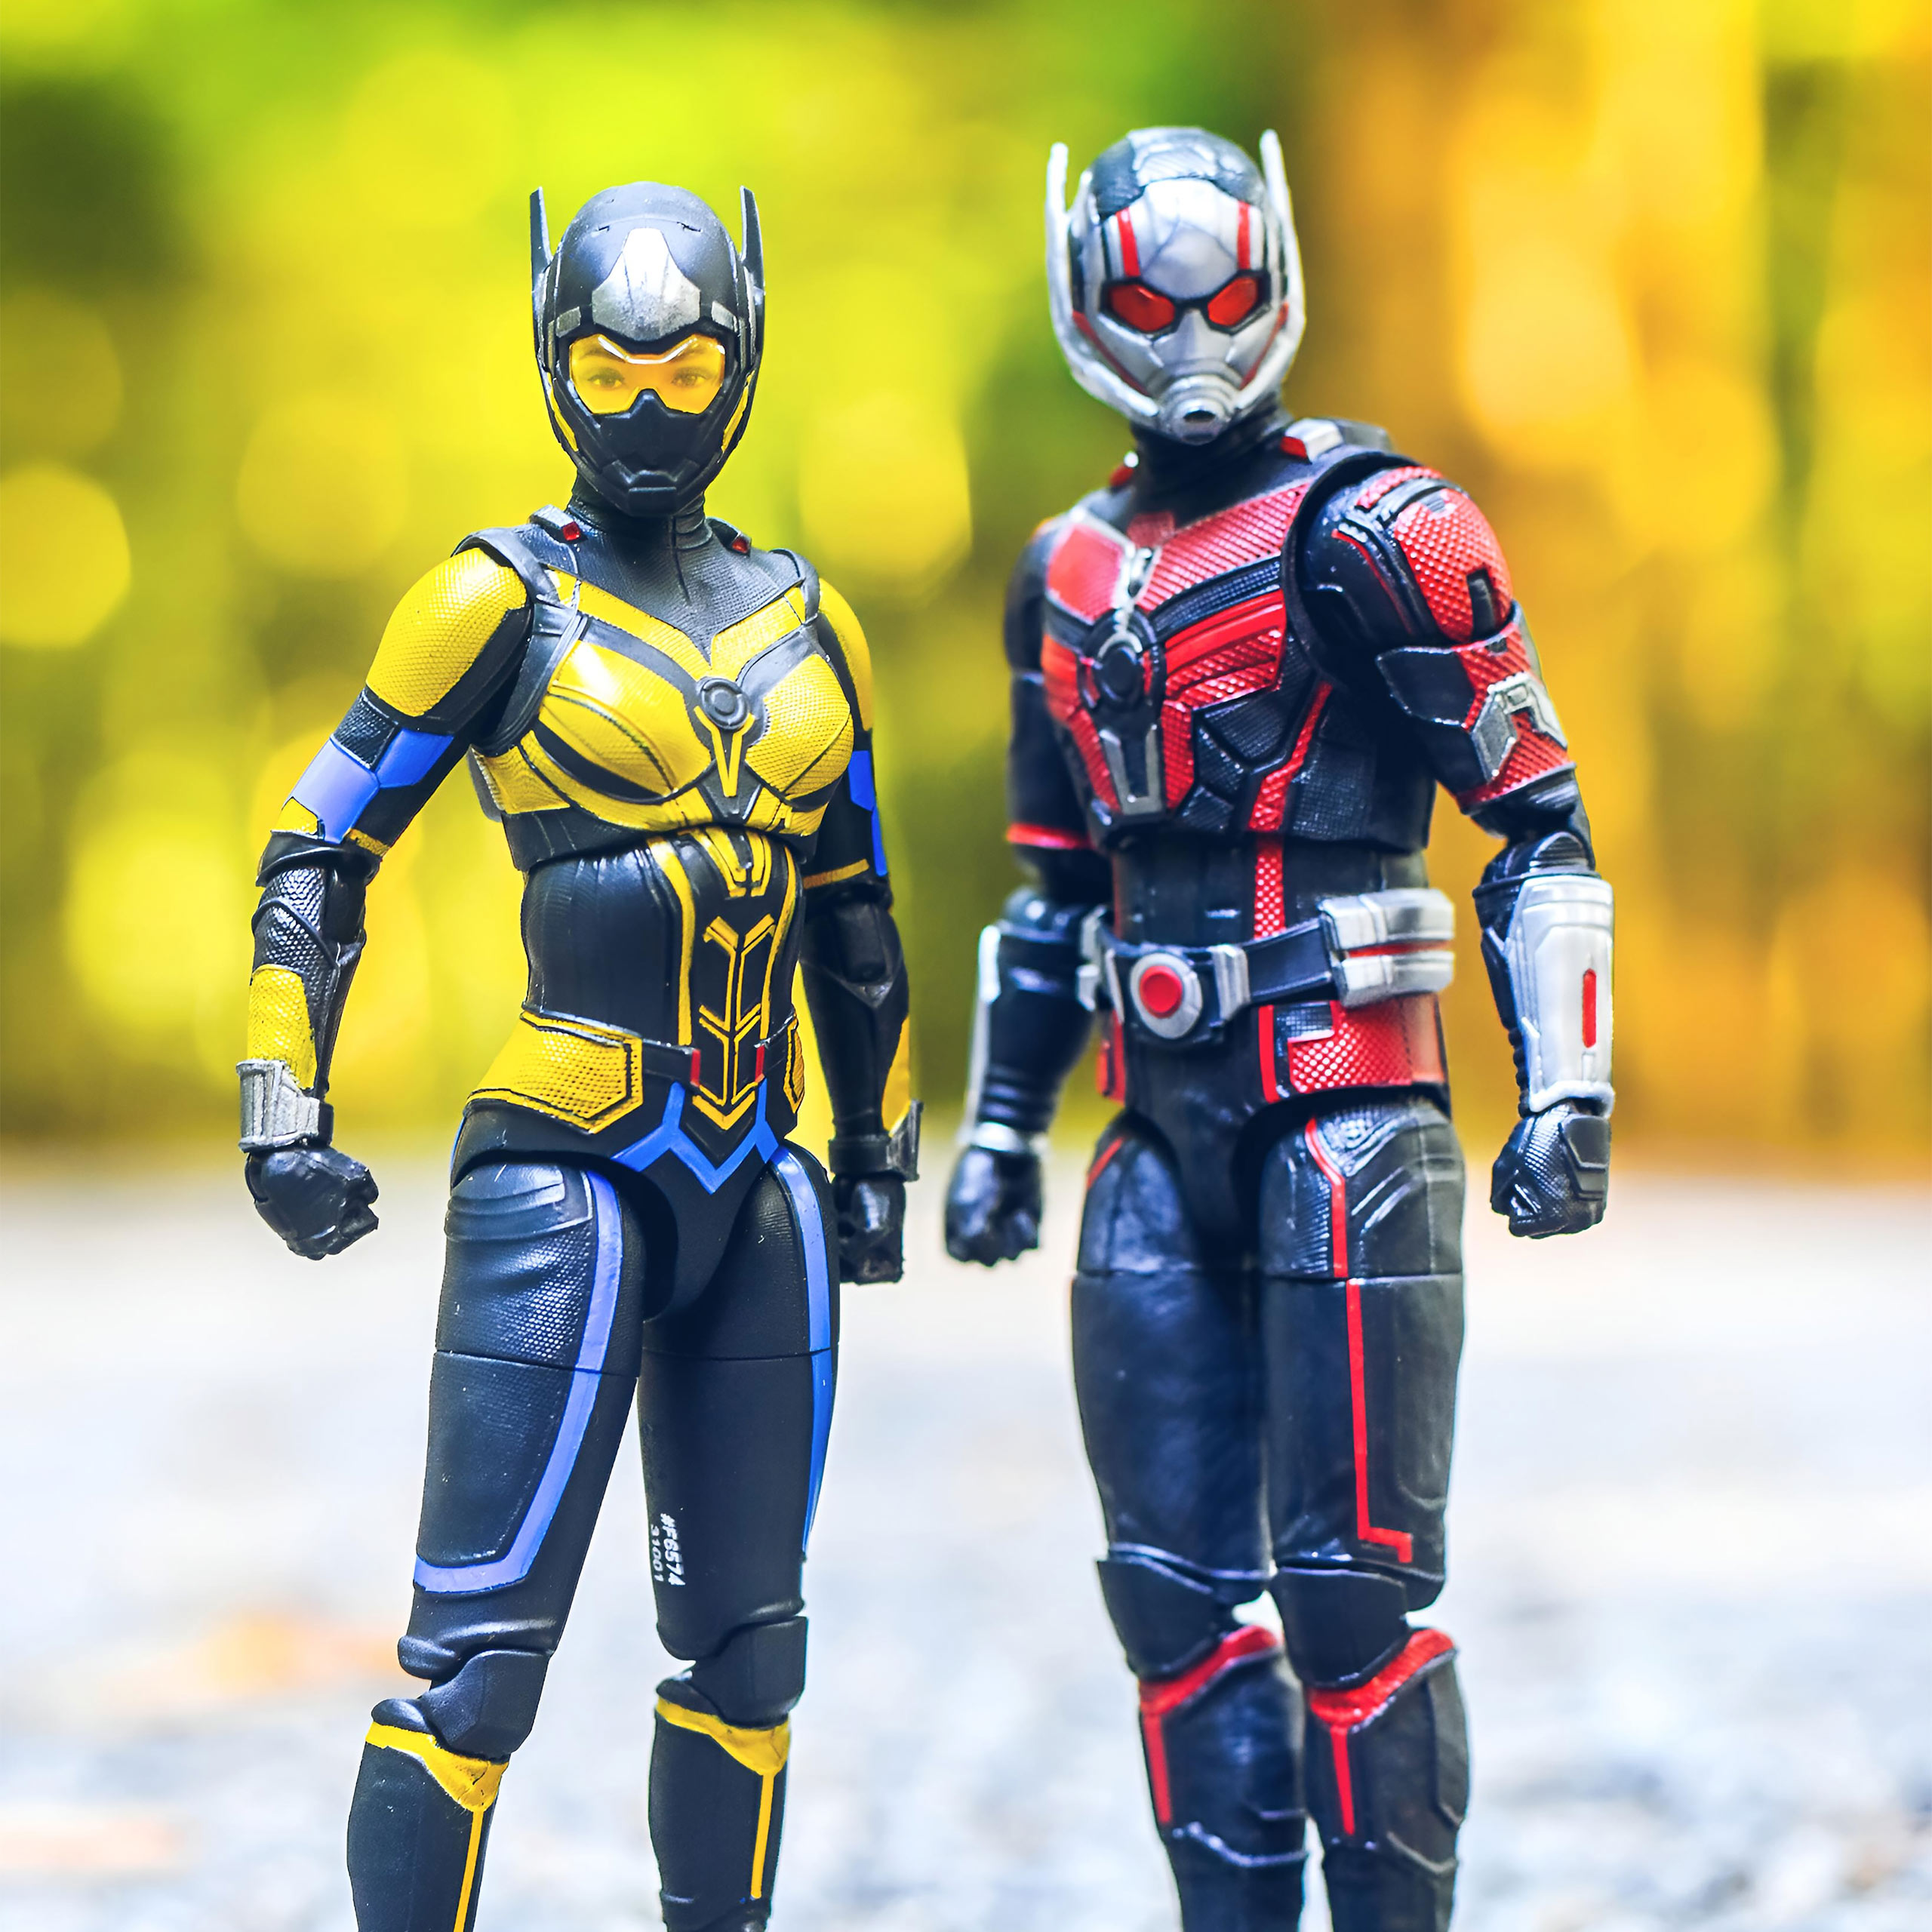 Ant-Man and the Wasp - Marvels Wasp Quantumania Actionfigur